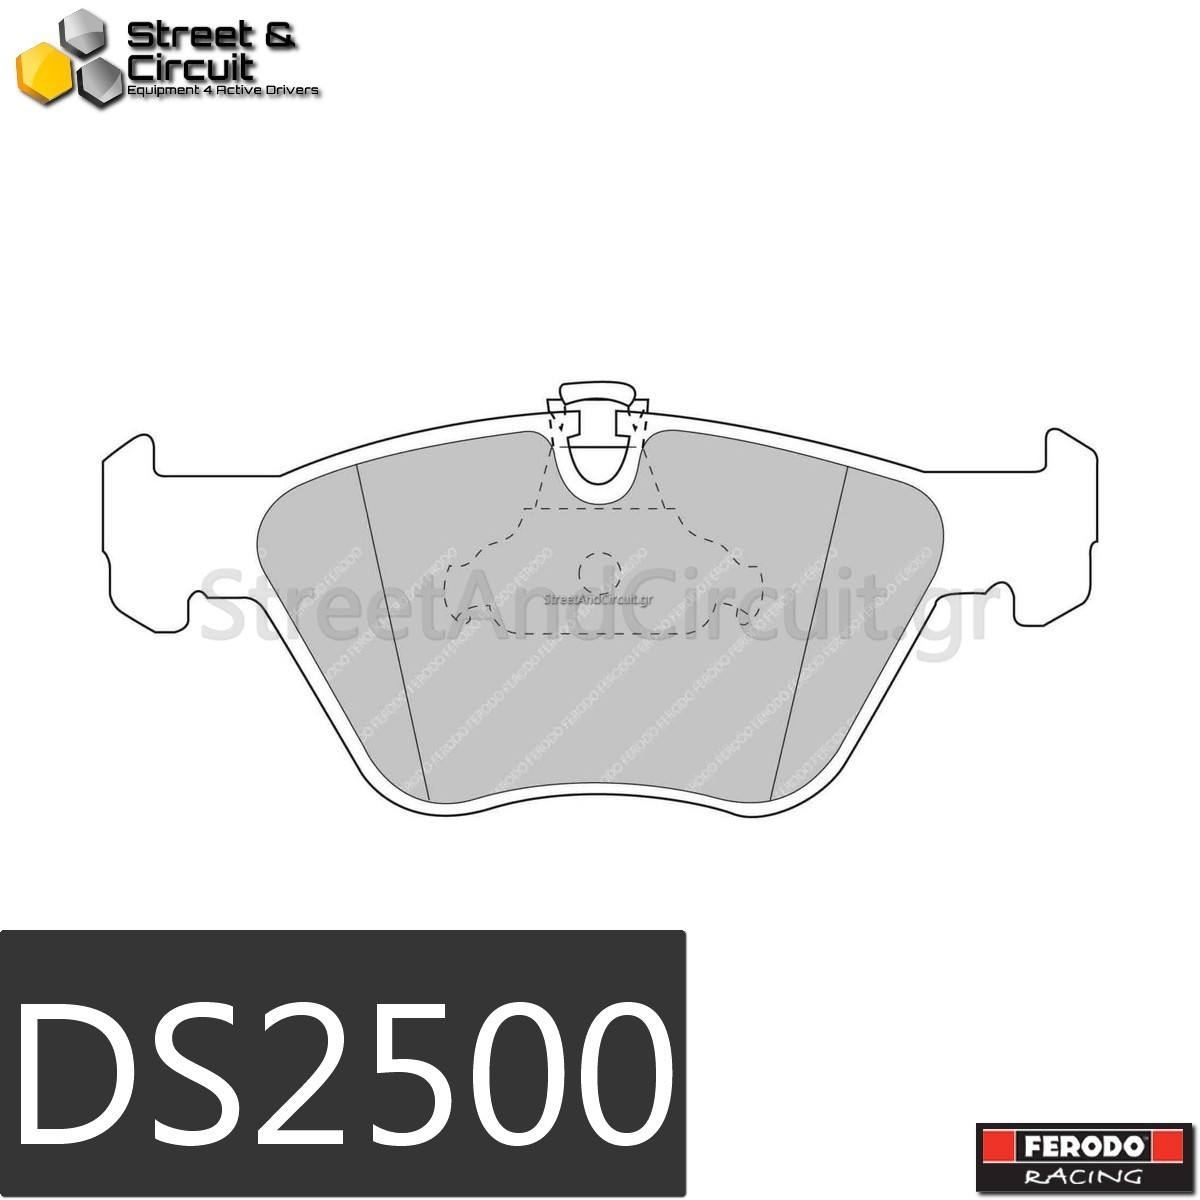 330i 3 (E46) 1998-2005 (FRONT), Brake System: ATE - Ferodo Racing Τακάκια *DS2500*